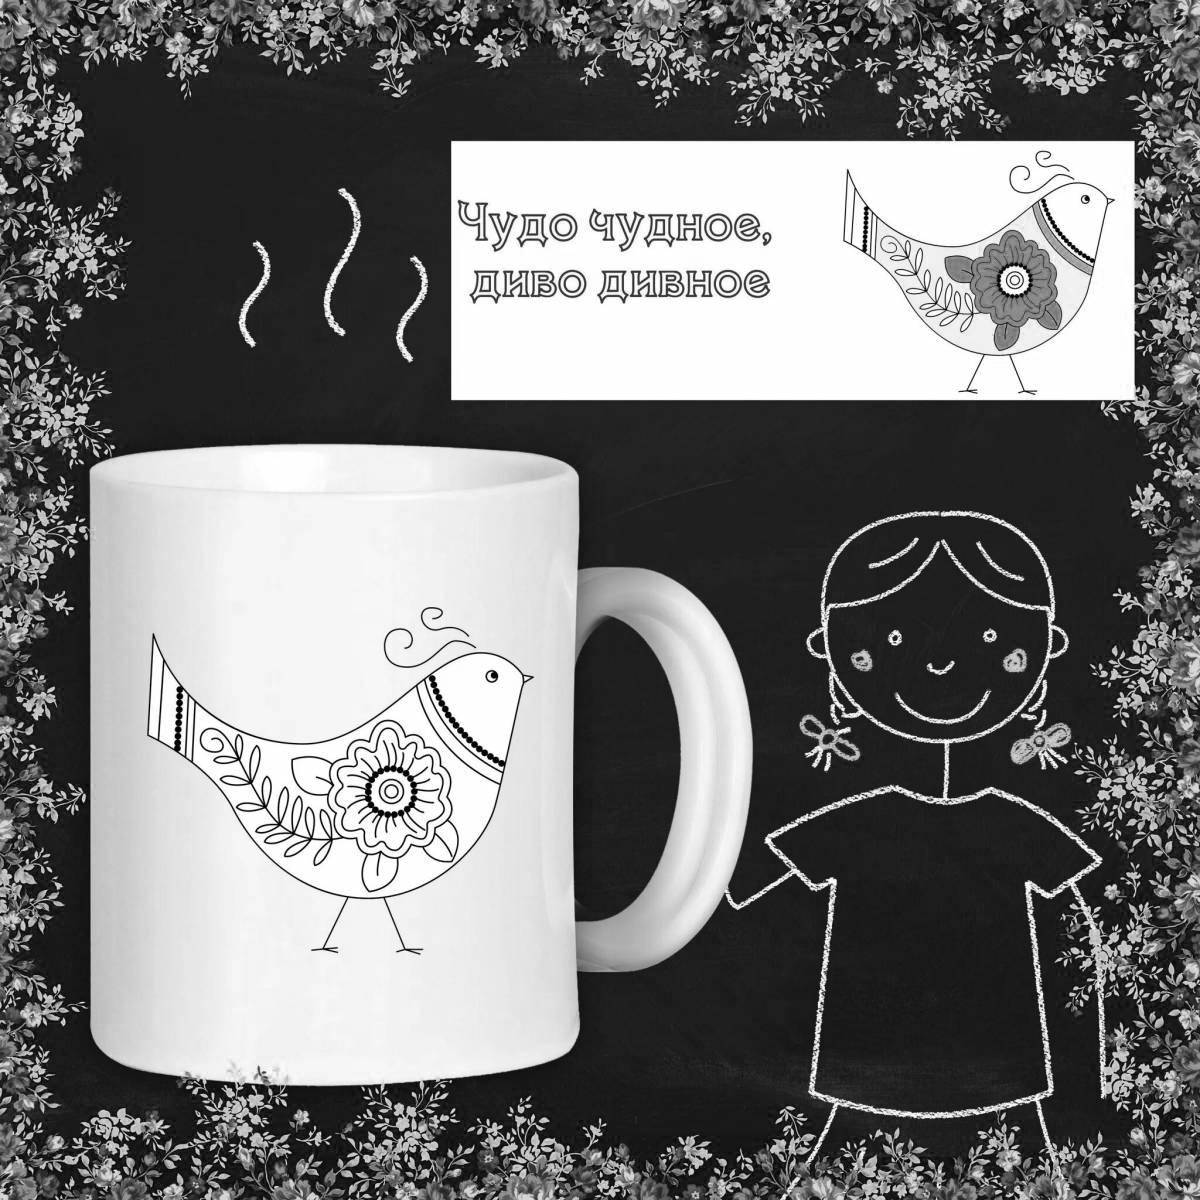 Fixed Price Mugs Playful Coloring Page